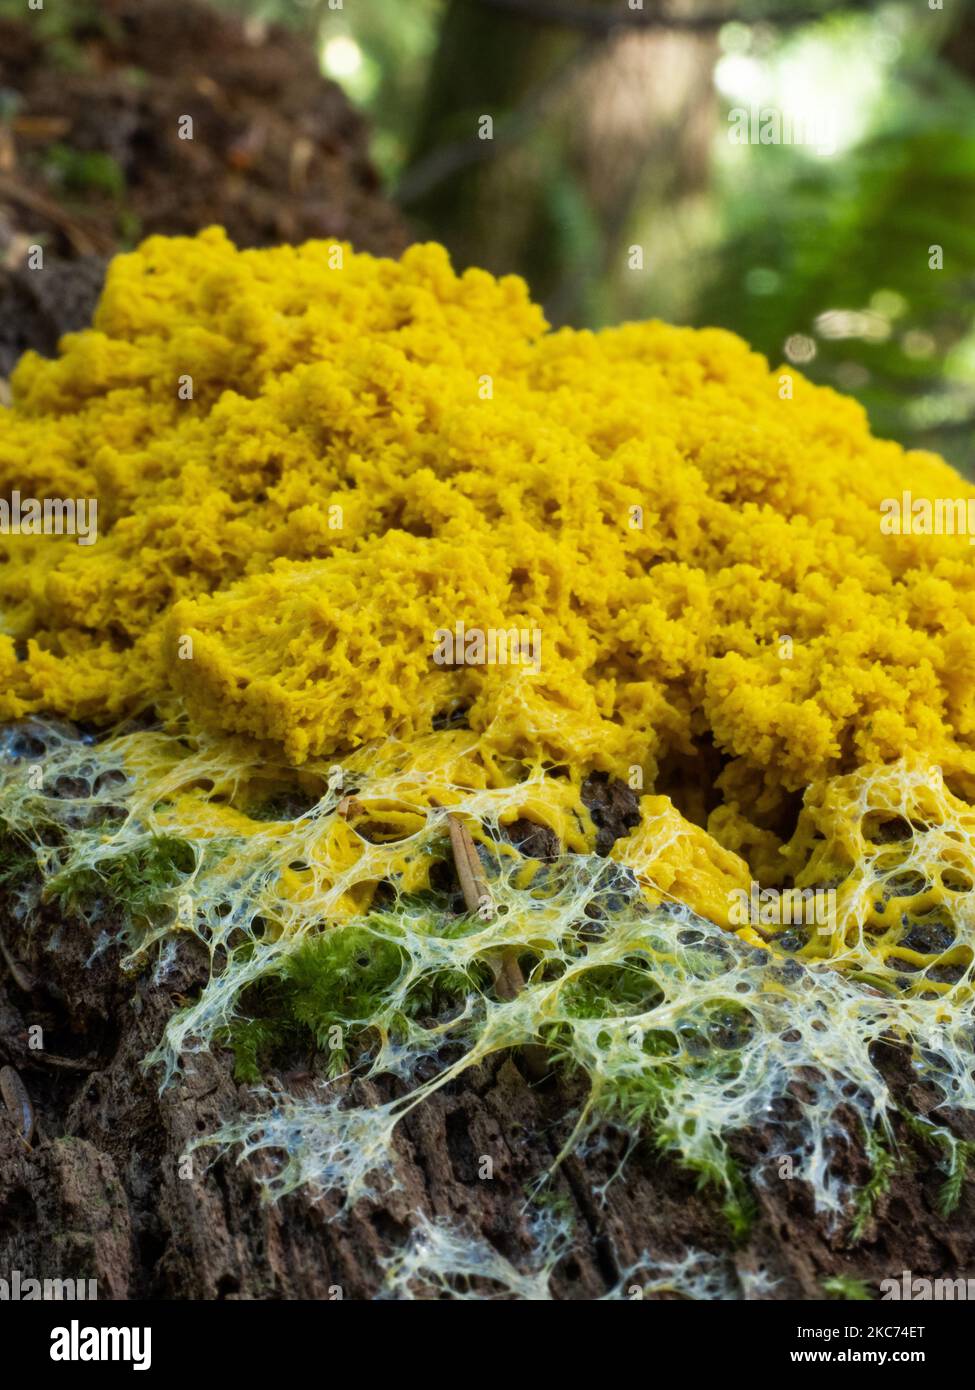 A closeup shot of scrambled egg slime mold on a tree trunk in the daylight Stock Photo